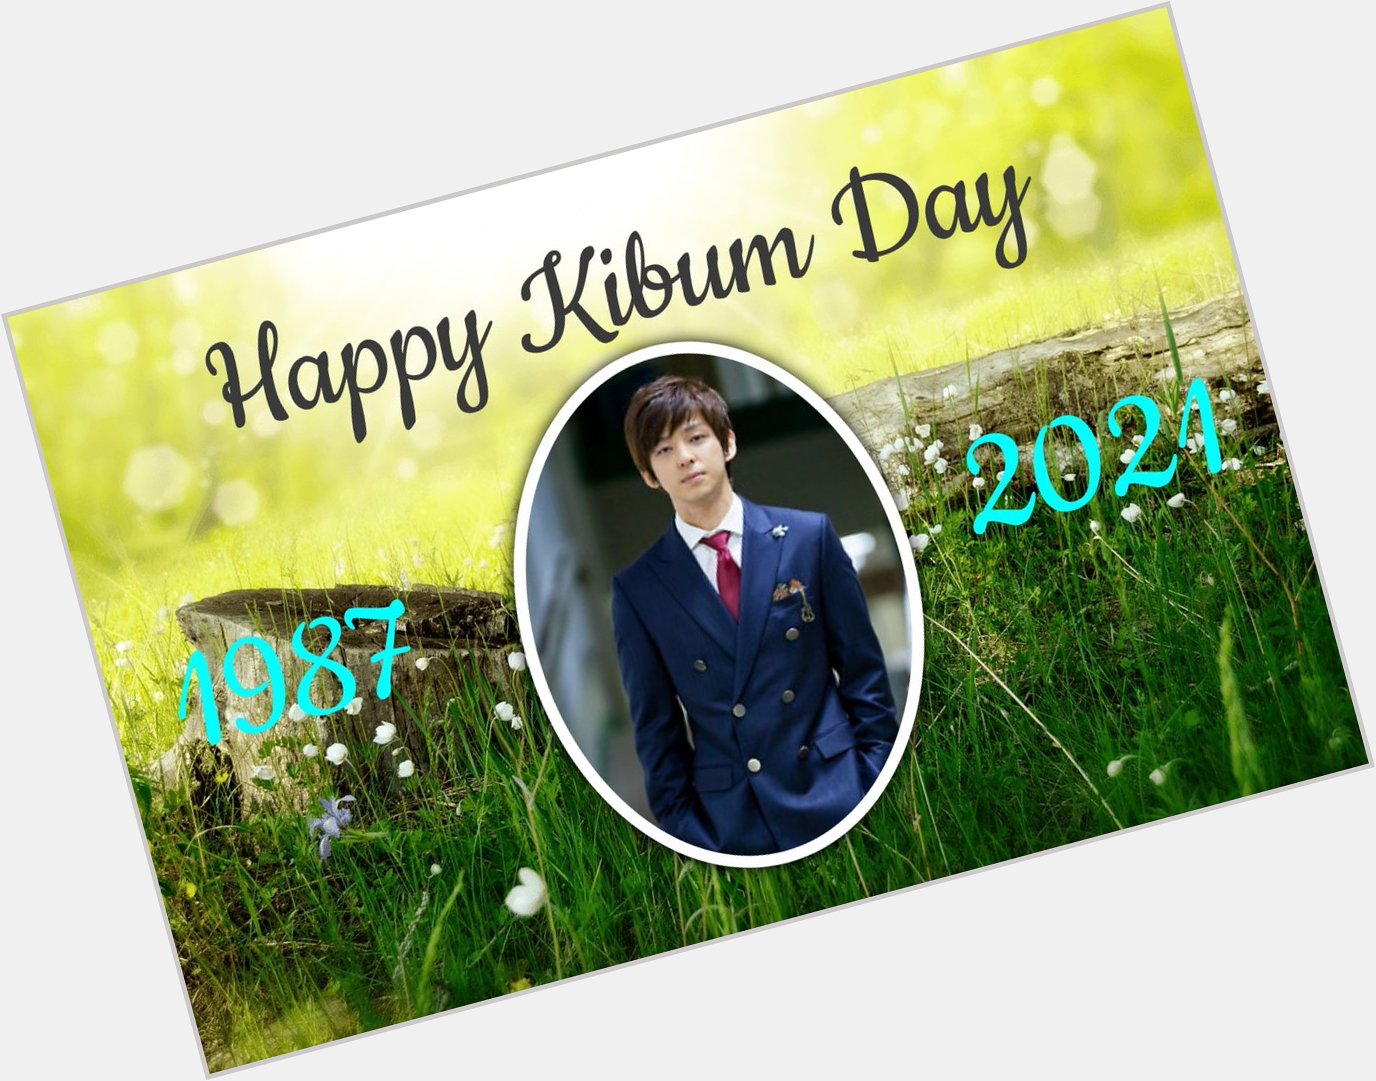 Enjoy the day, year and all the most beautiful moments of this day. Happy birthday Kim Kibum 